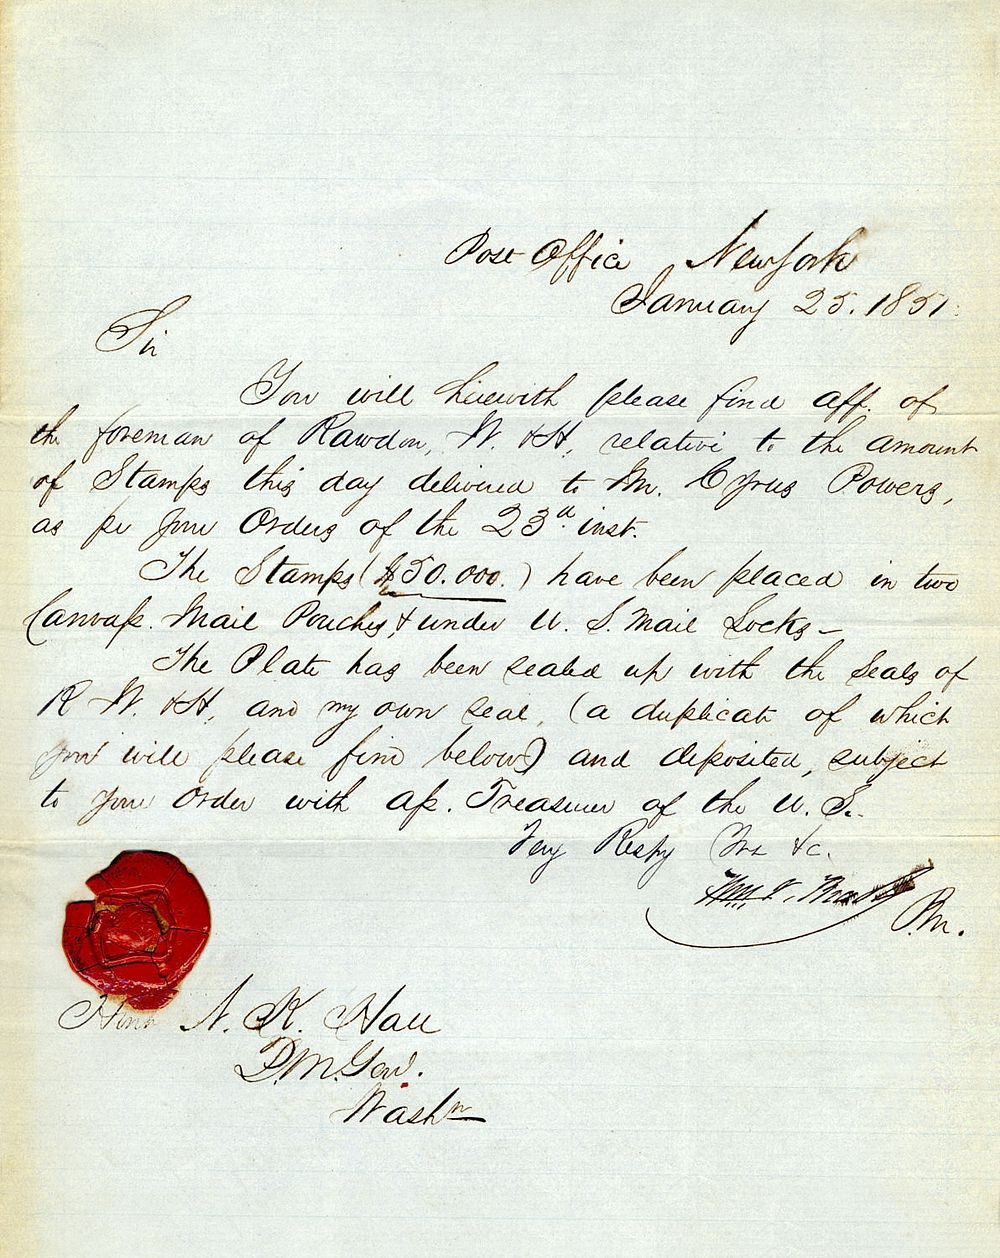 Letter written to William V. Brady. Original public domain image from Smithsonian. Digitally enhanced by rawpixel.